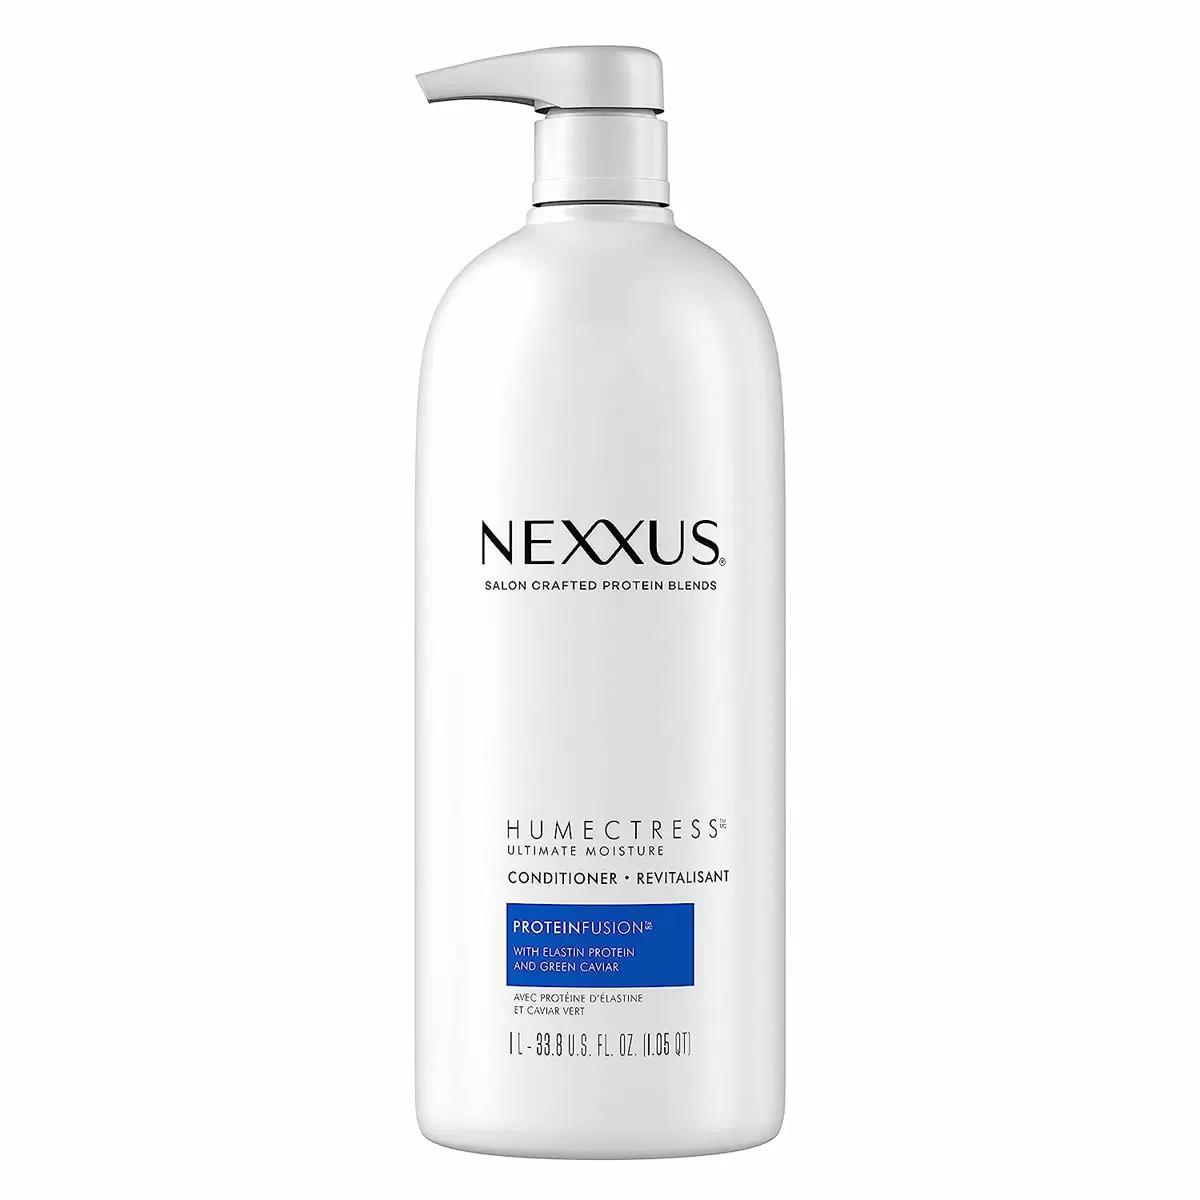 Nexxus Humectress Moisturizing Hair Conditioner for $11.76 Shipped